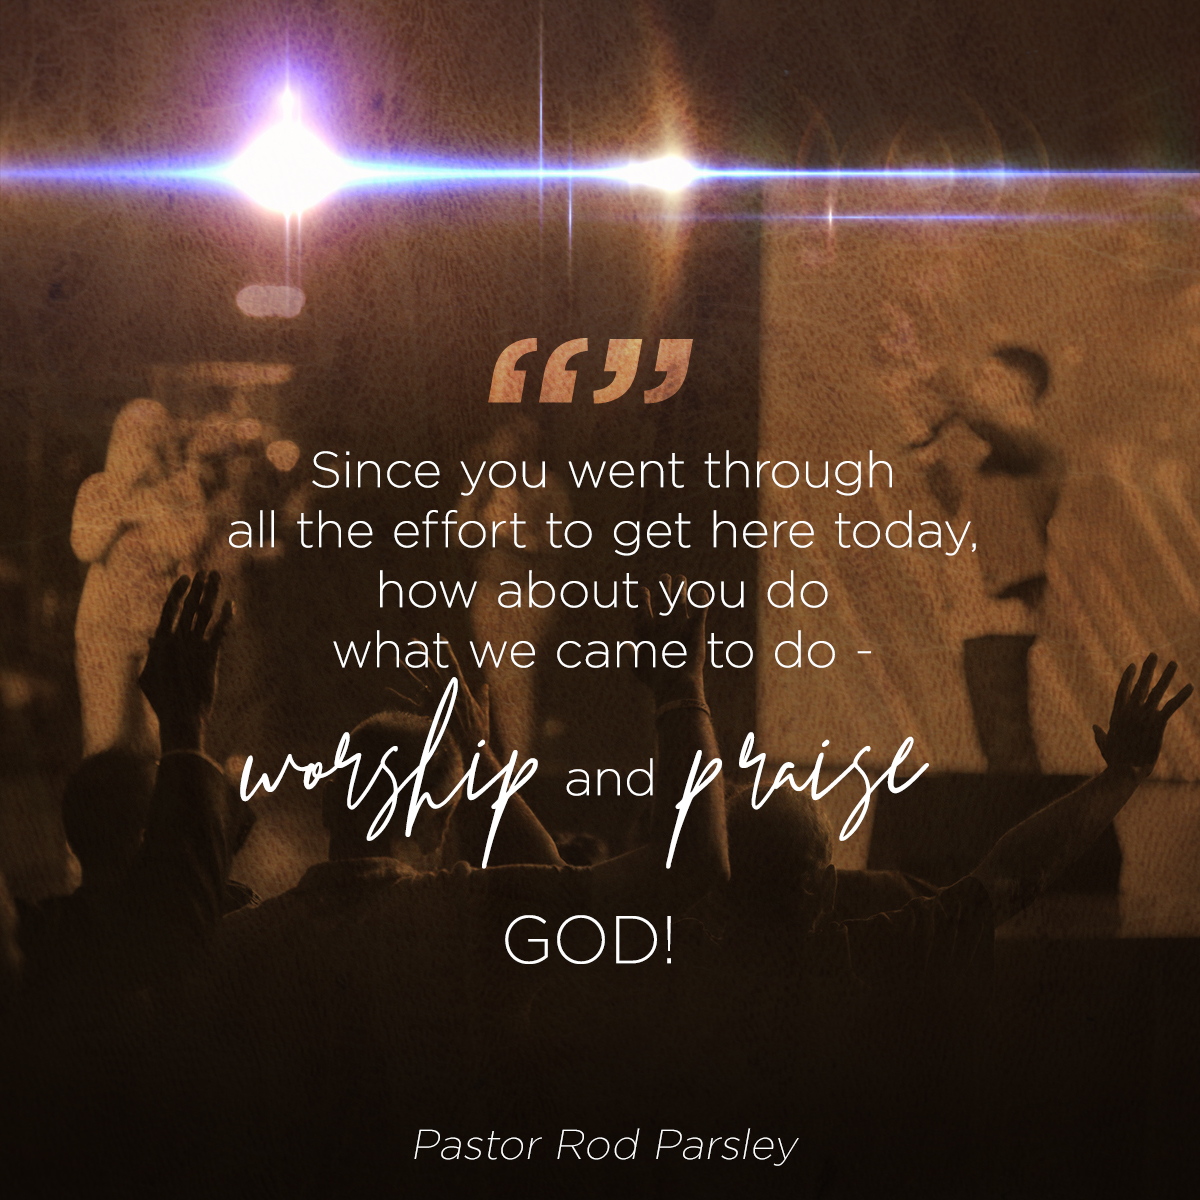 “Since you went through all the effort to get here today, how about you do what we came to do – worship and praise God!